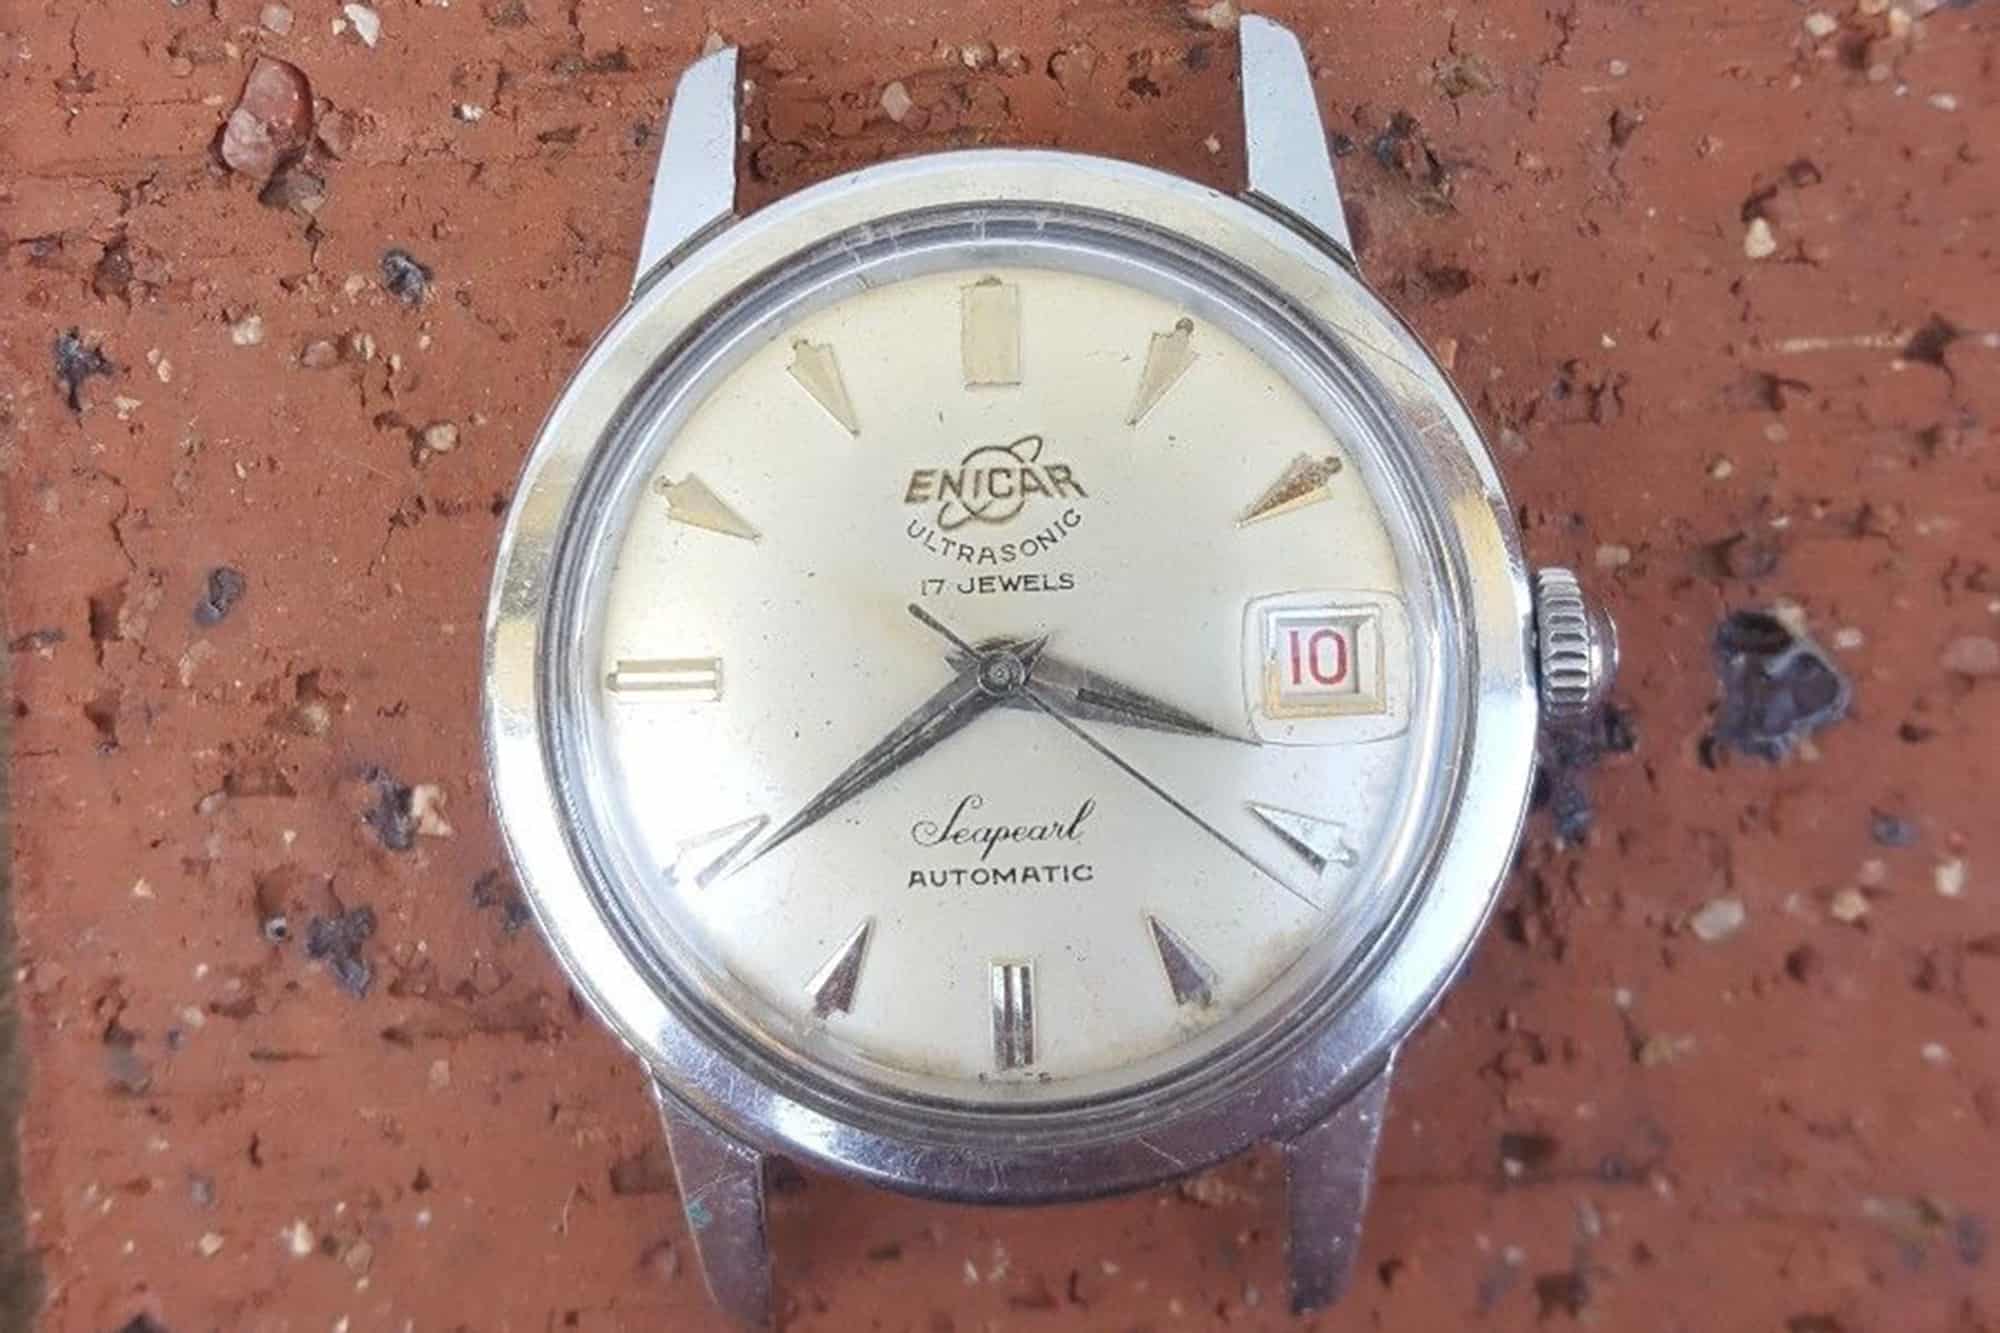 eBay Finds: Enicar Seapearl Automatic, André Bouchard Skindiver by Alstater Watch Co., and More